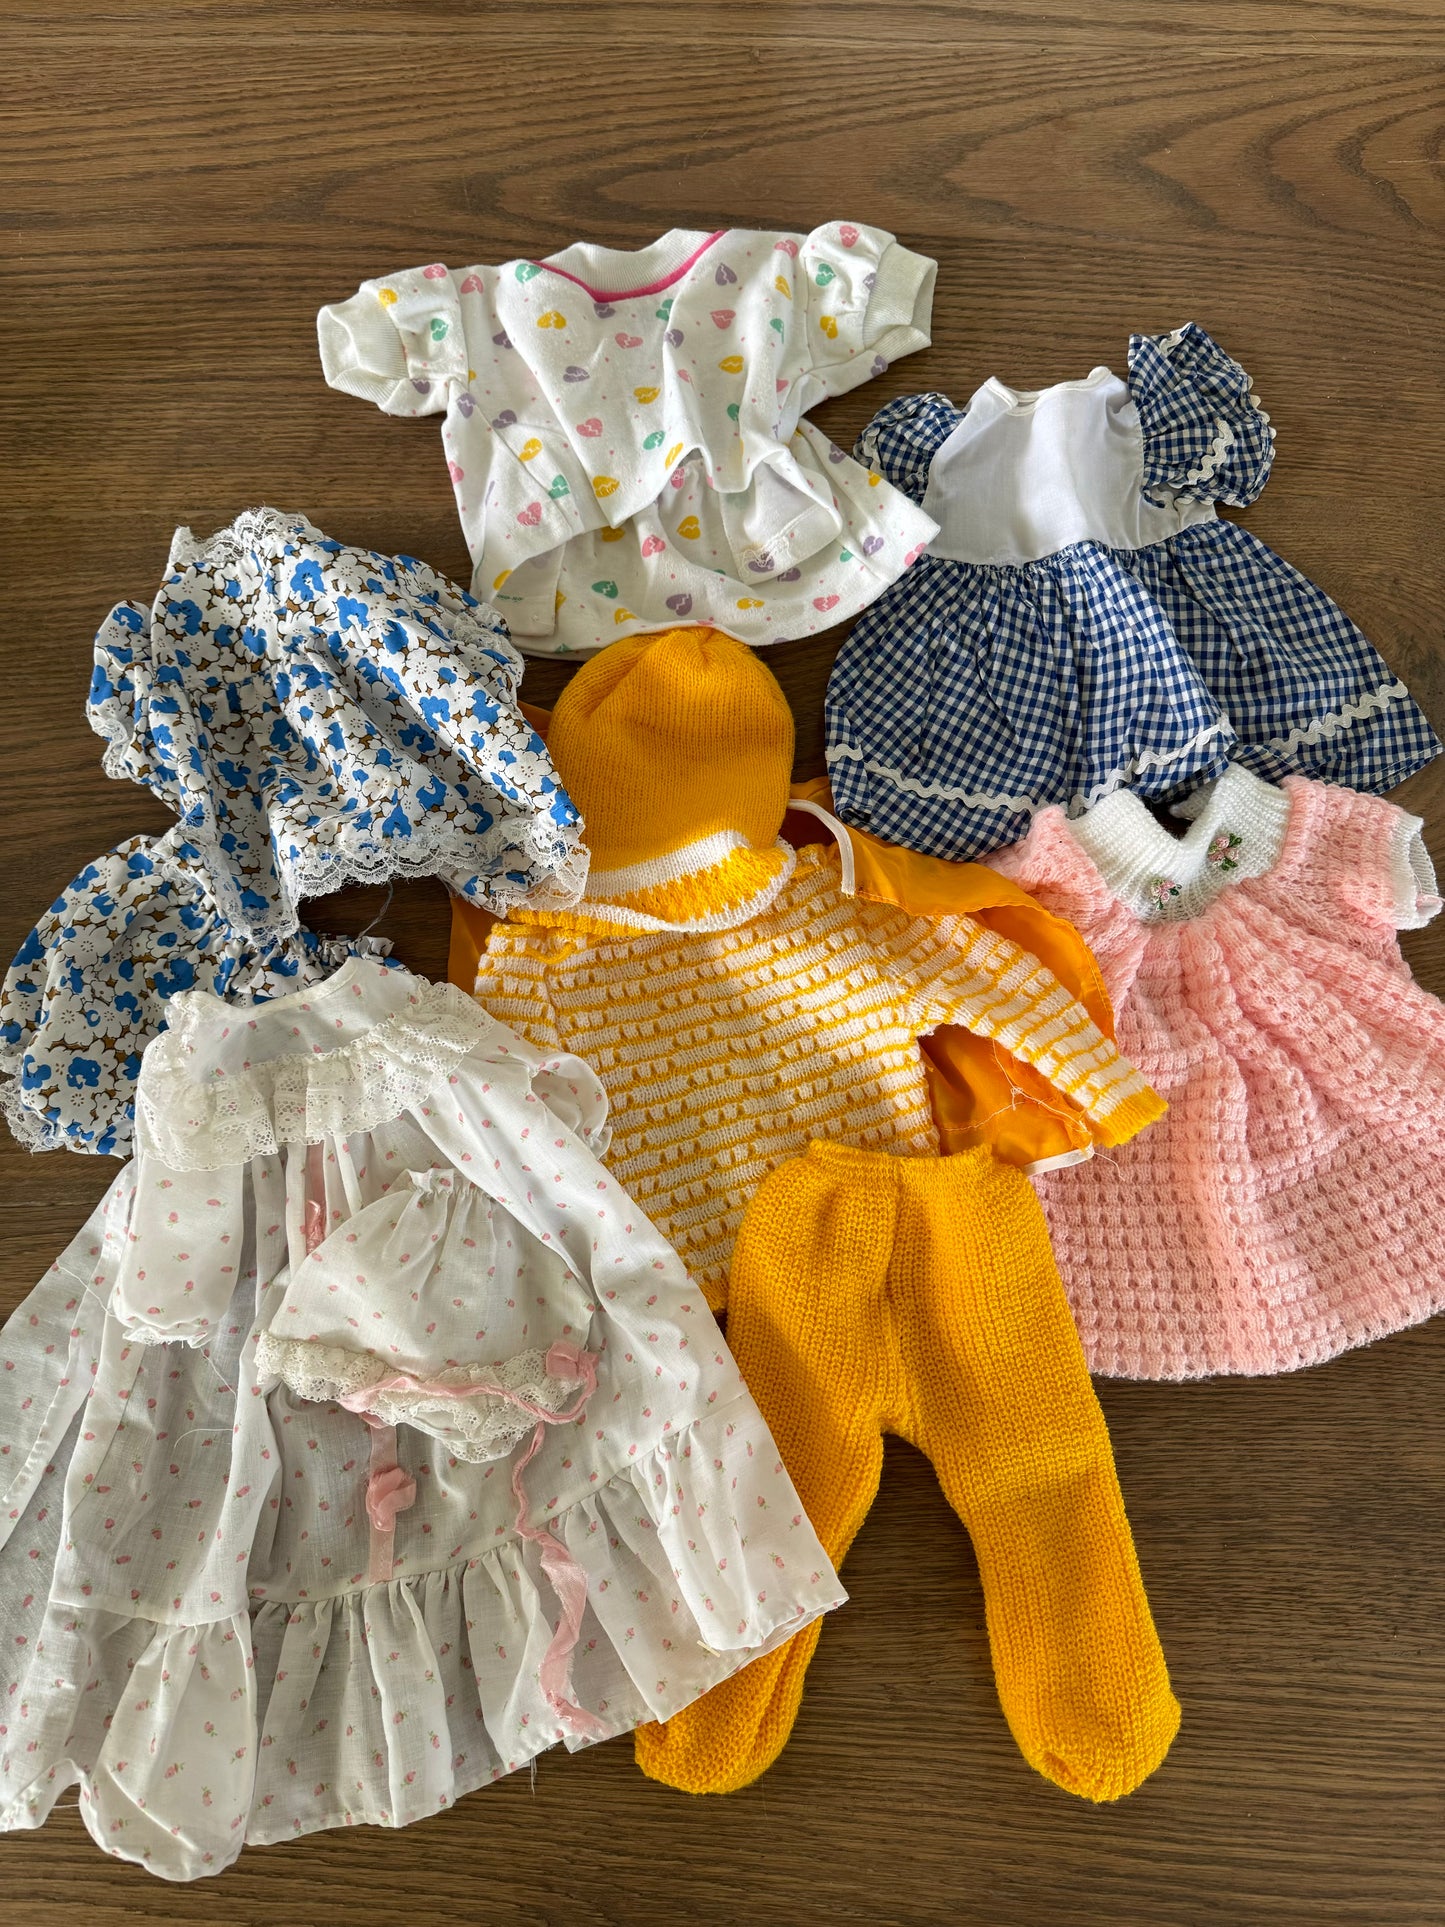 Vintage Baby Doll Collection Set - fits 16-18” doll estimated